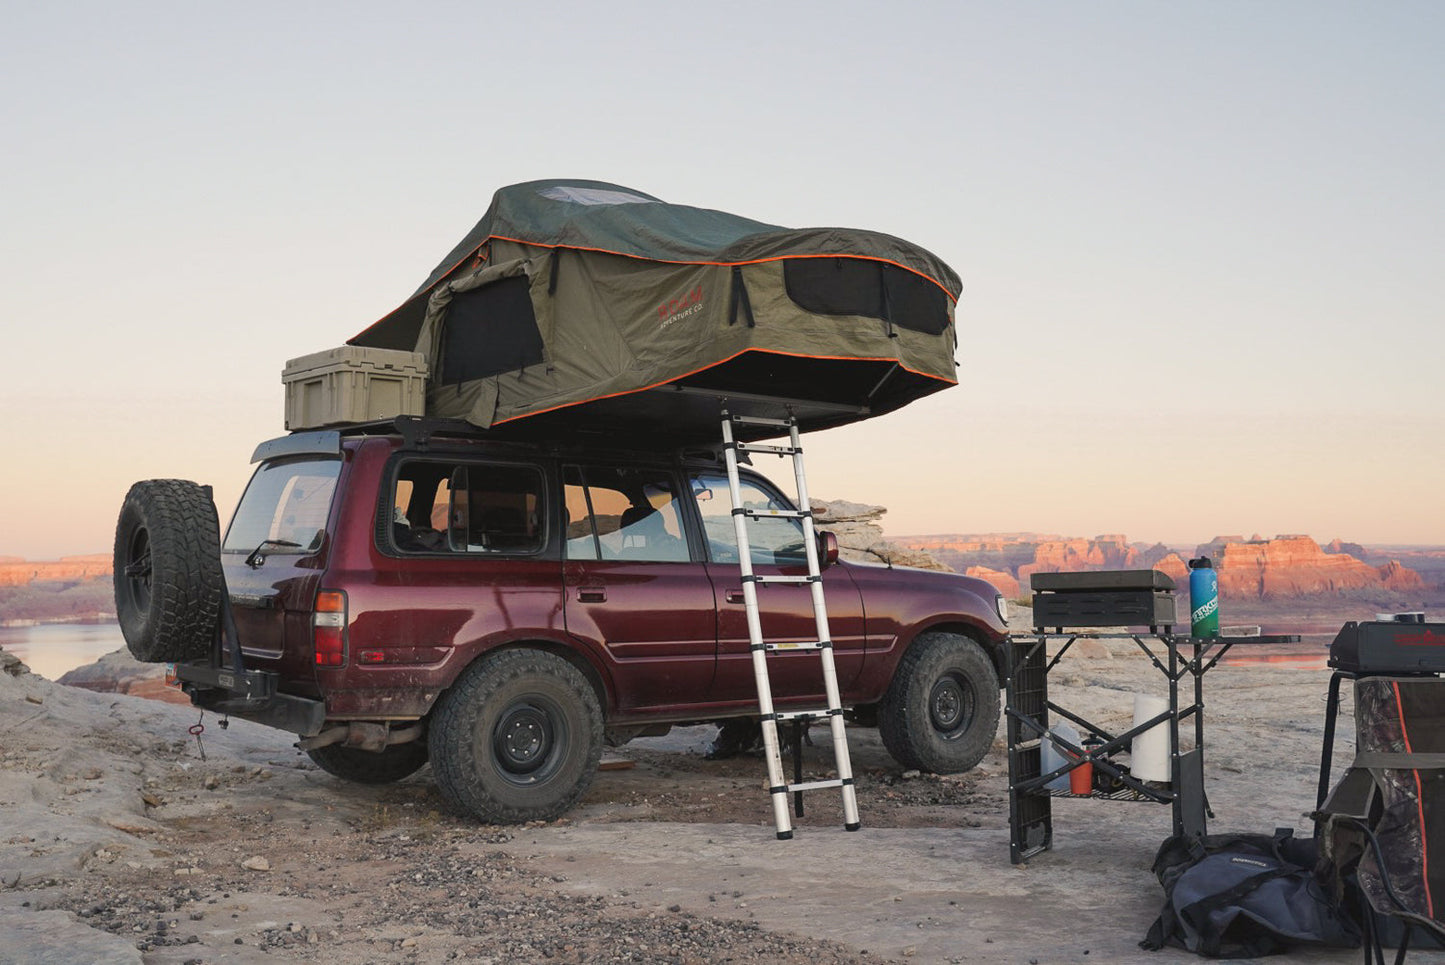 The Vagabond Rooftop Tent by ROAM Adventure Co.